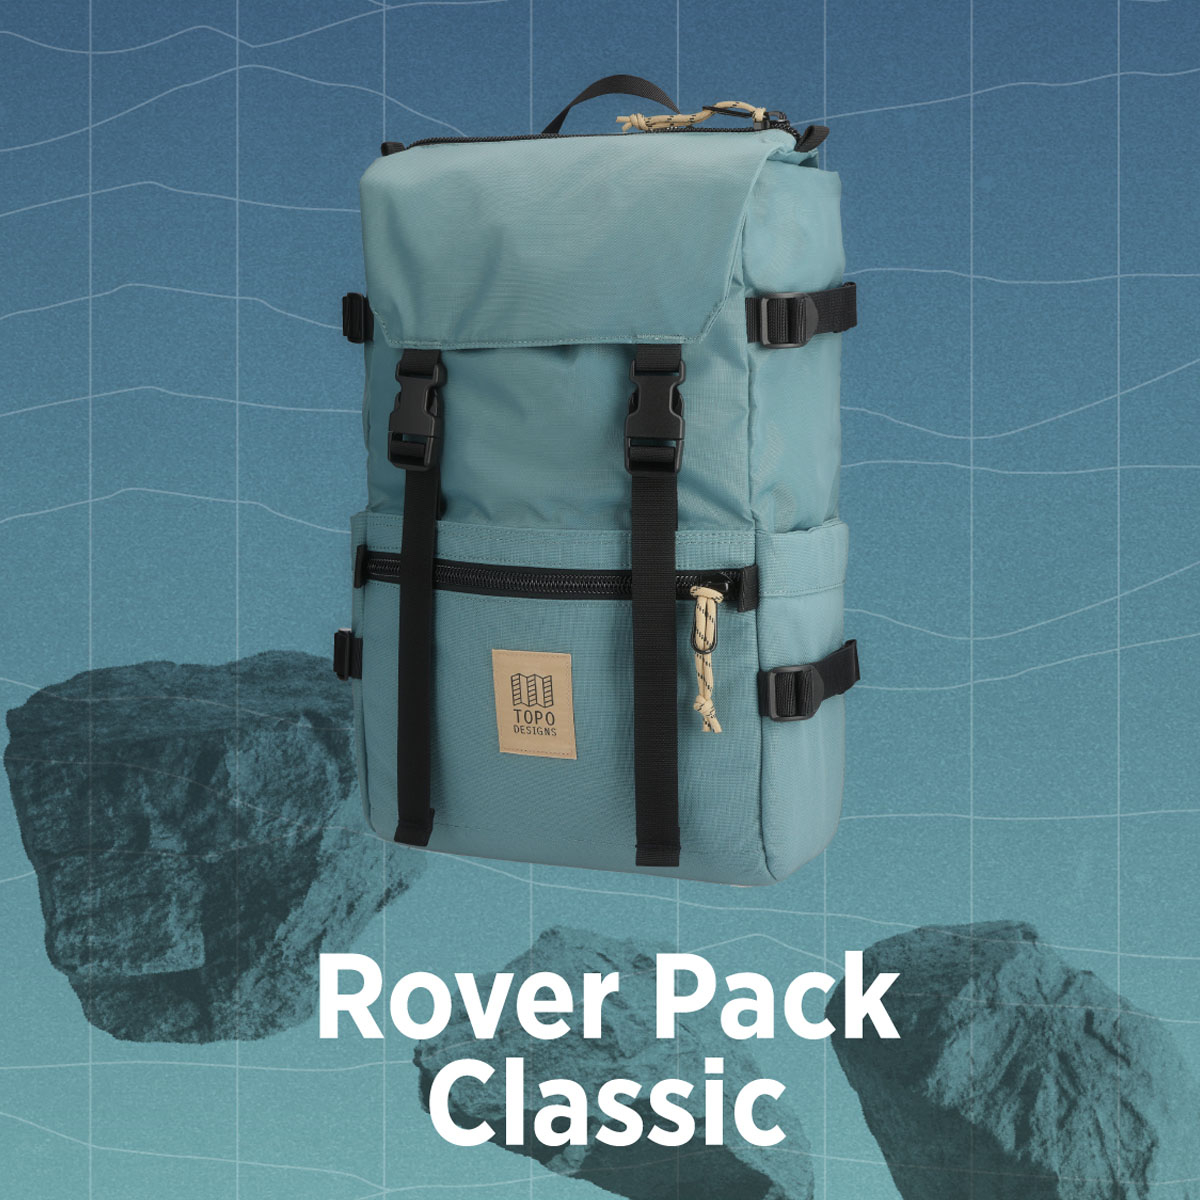 Topo Designs Rover Pack Classic Sea Pine, durable, lightweight and water-resistant pack for daily use